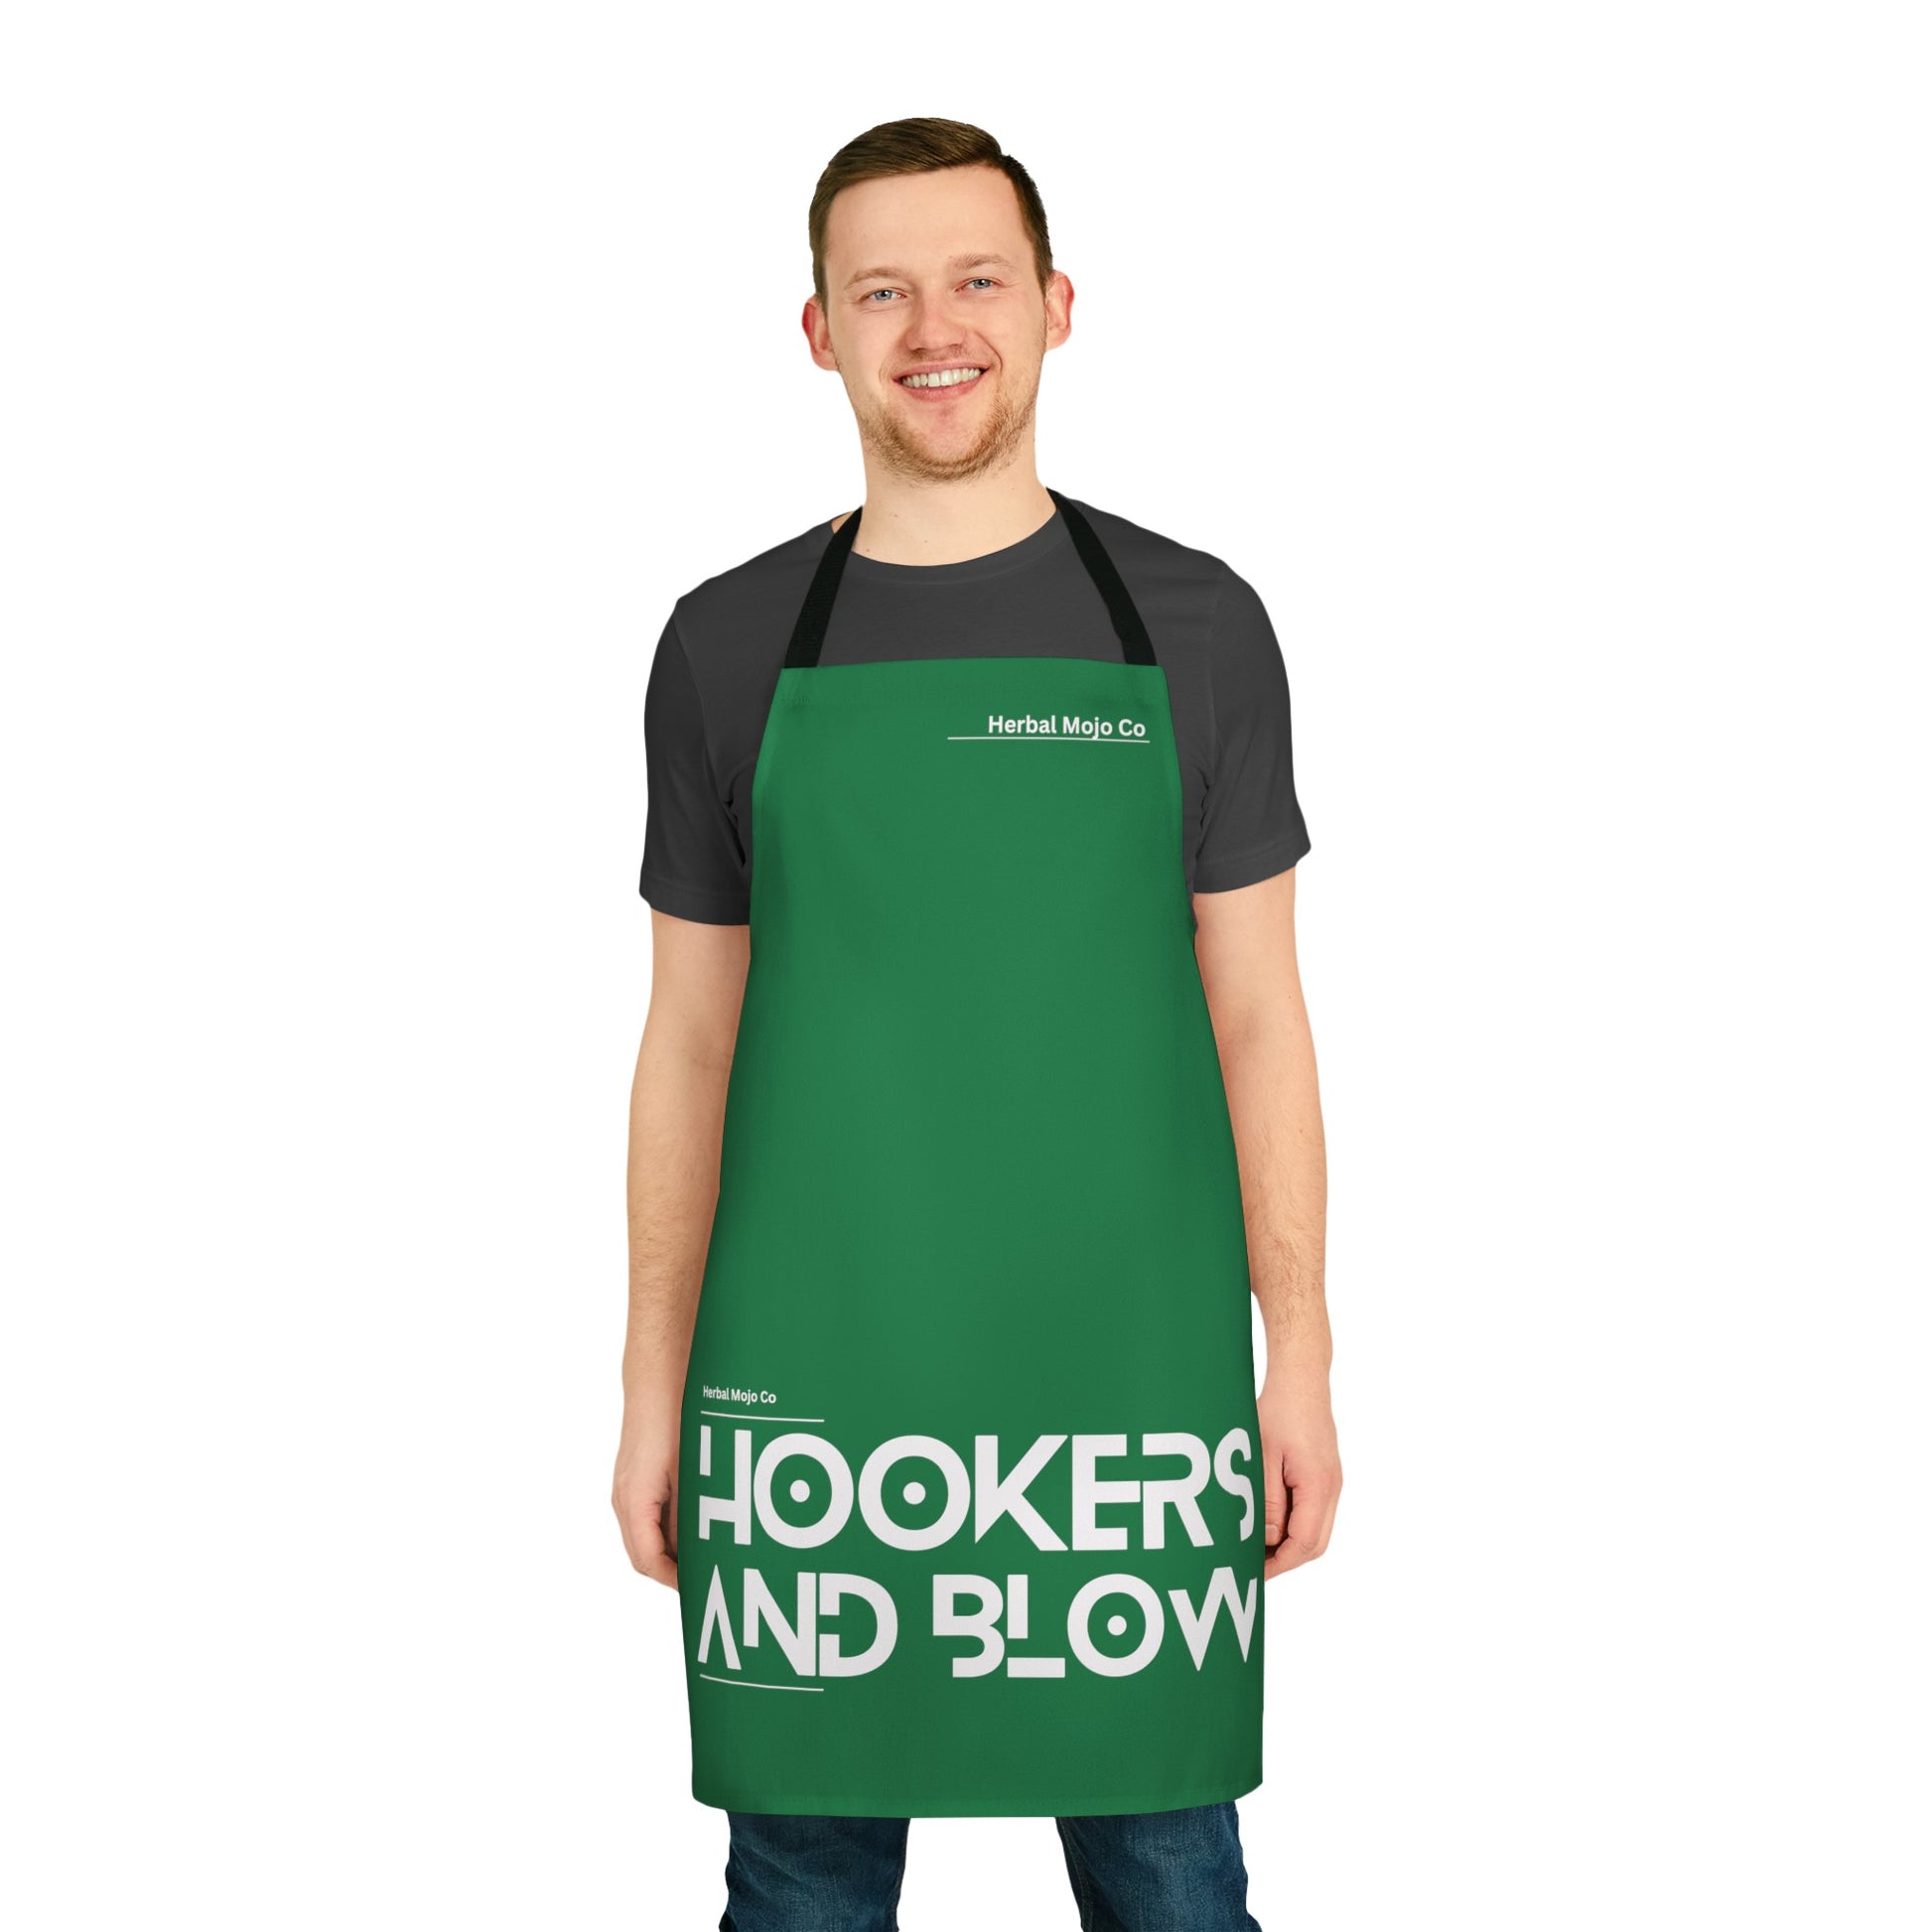 The Stamina for Men Hookers and Blow BBQ apron frontal shot as worn by a man